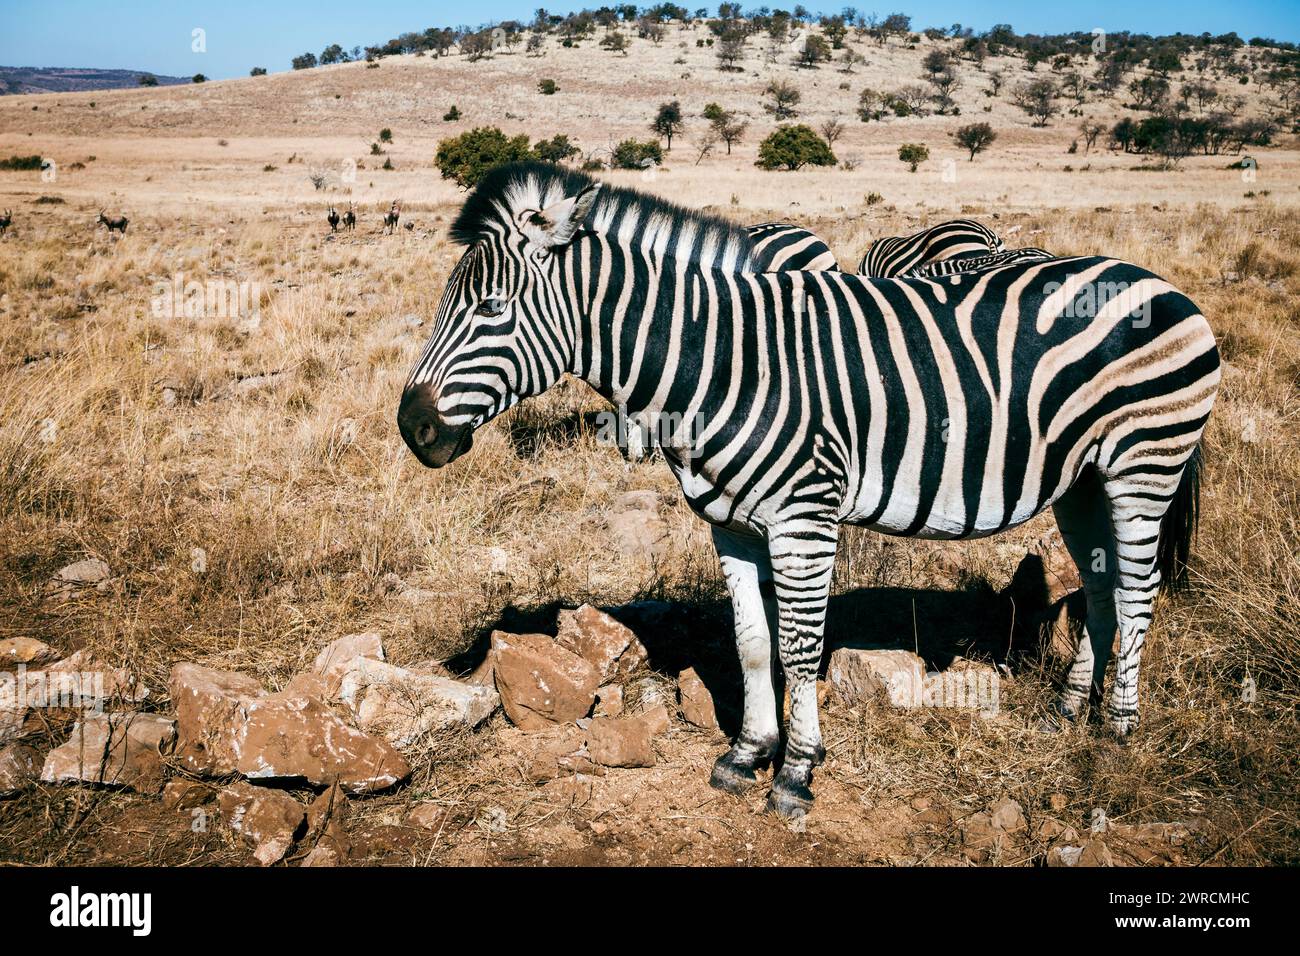 Zebra in its natural habitat in a wildlife preserve area in Gauteng province of South Africa Stock Photo